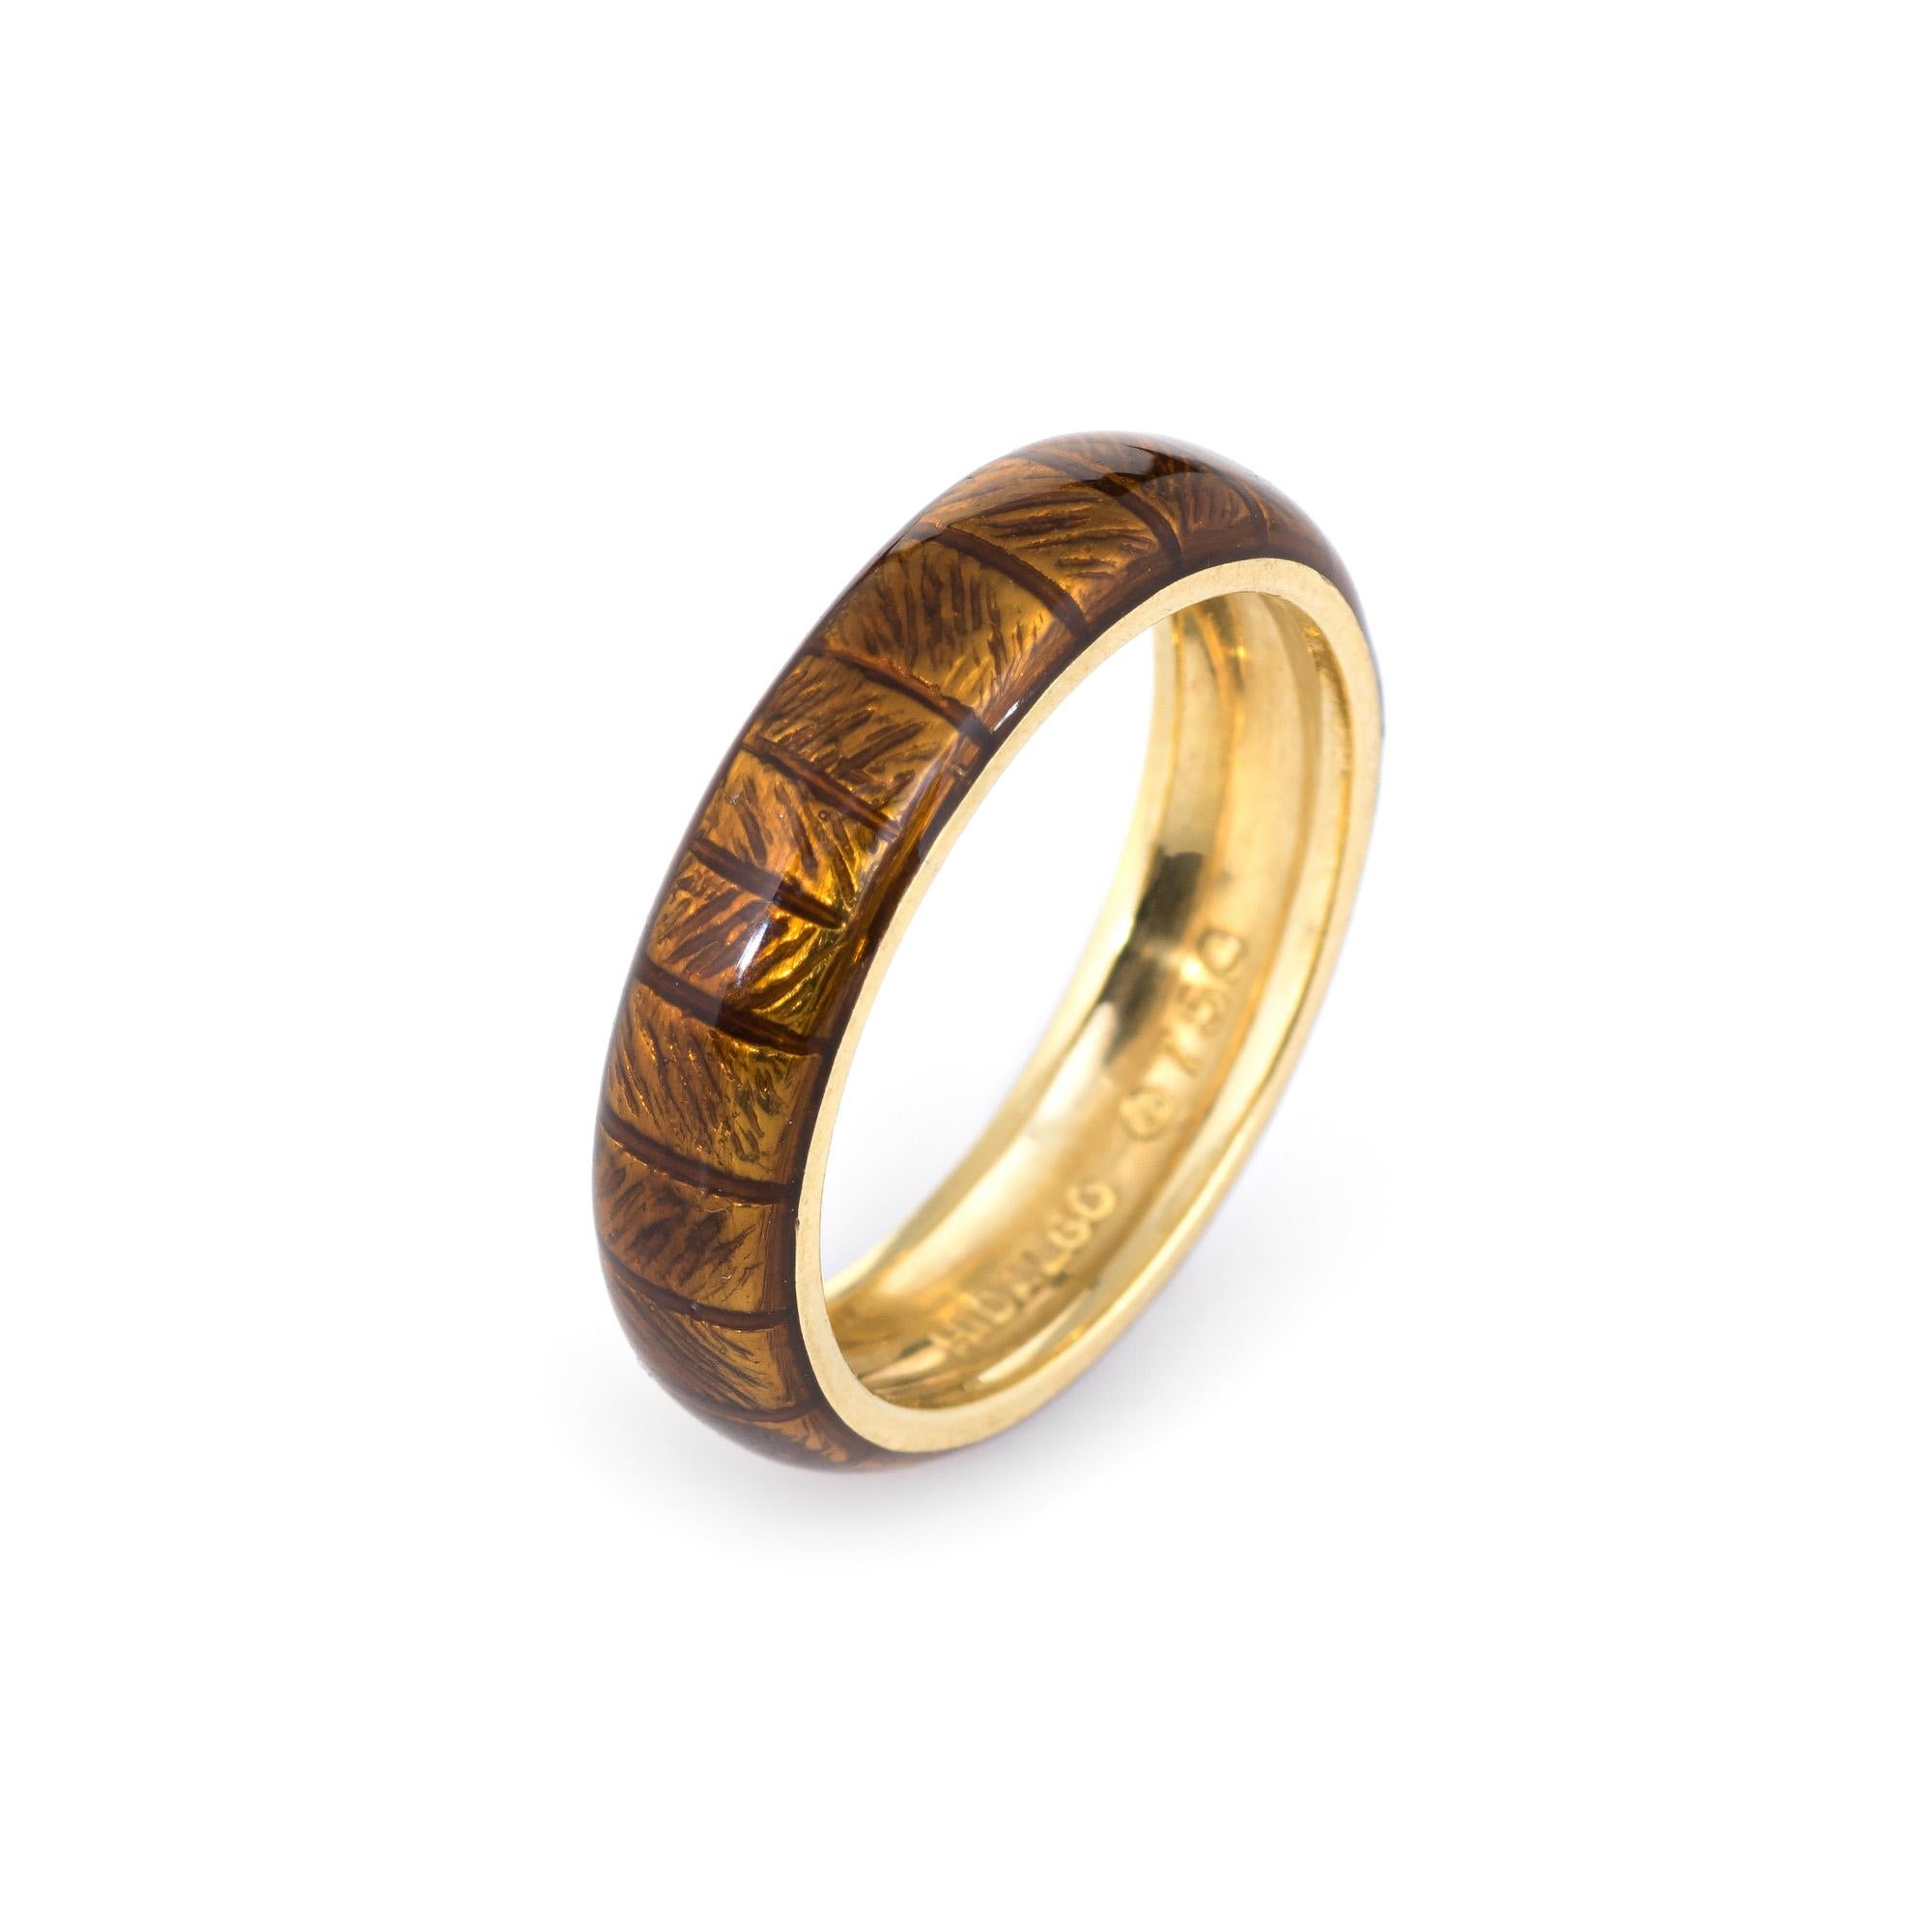 Finely detailed estate Hidalgo band crafted in 18 karat yellow gold. 

Brown enamel adorns a textured band (in excellent condition and free of cracks or chips).  

The simple and sweet ring is ideal worn alone or stacked with your fine jewelry from